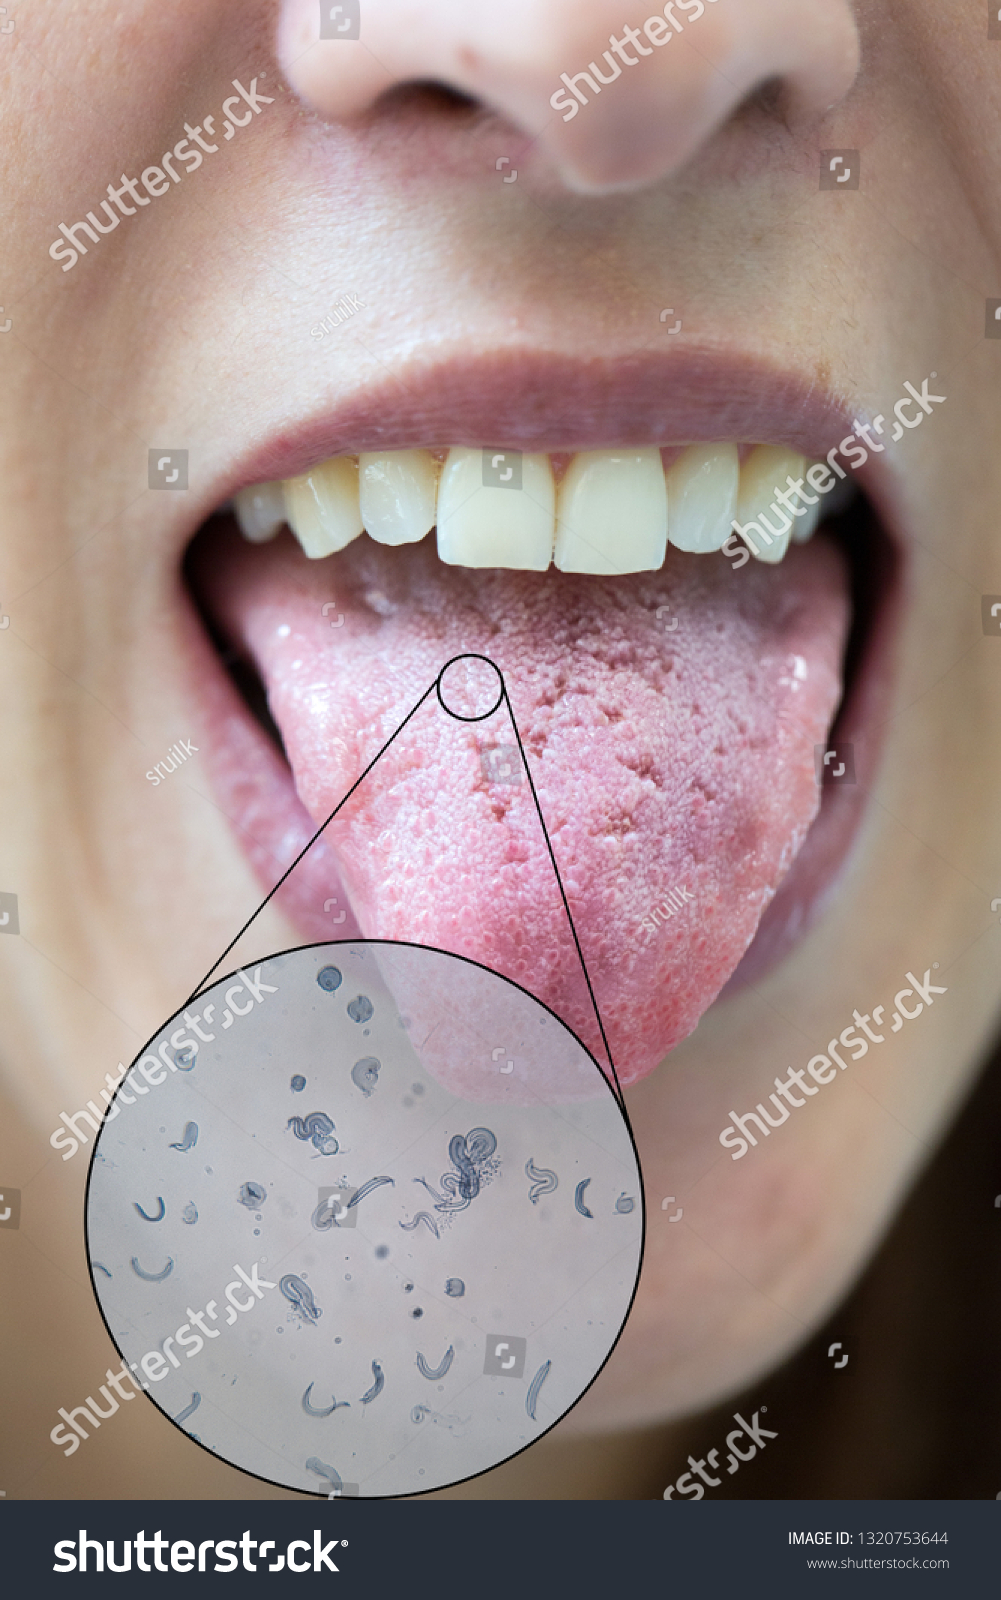 Tongue Cracks Bacterial Infection Microscopic View 스톡 사진 1320753644 Shutterstock 7150